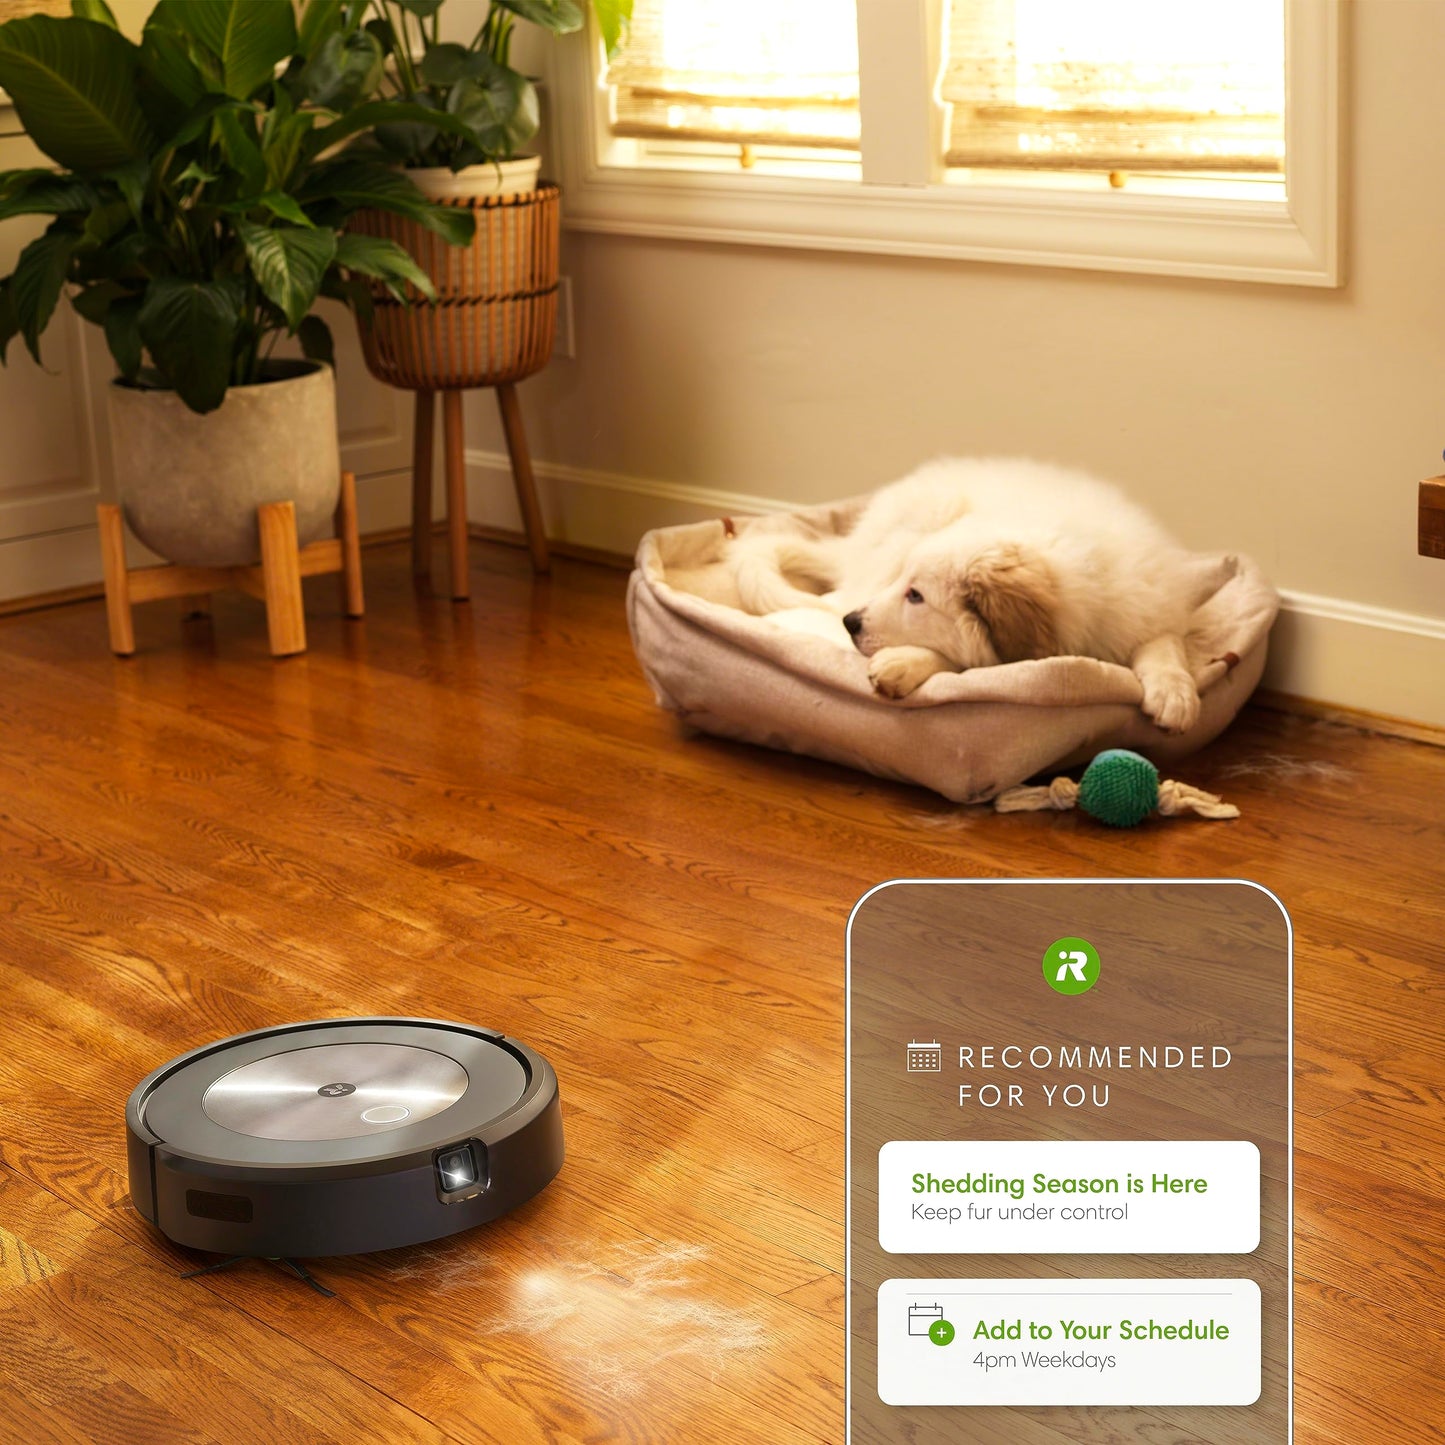 iRobot Roomba j7+ (7550) Self-Emptying Robot Vacuum – Avoids Common Obstacles Like Socks, Shoes, and Pet Waste, Empties Itself for 60 Days, Smart Mapping, Works with Alexa - Like New